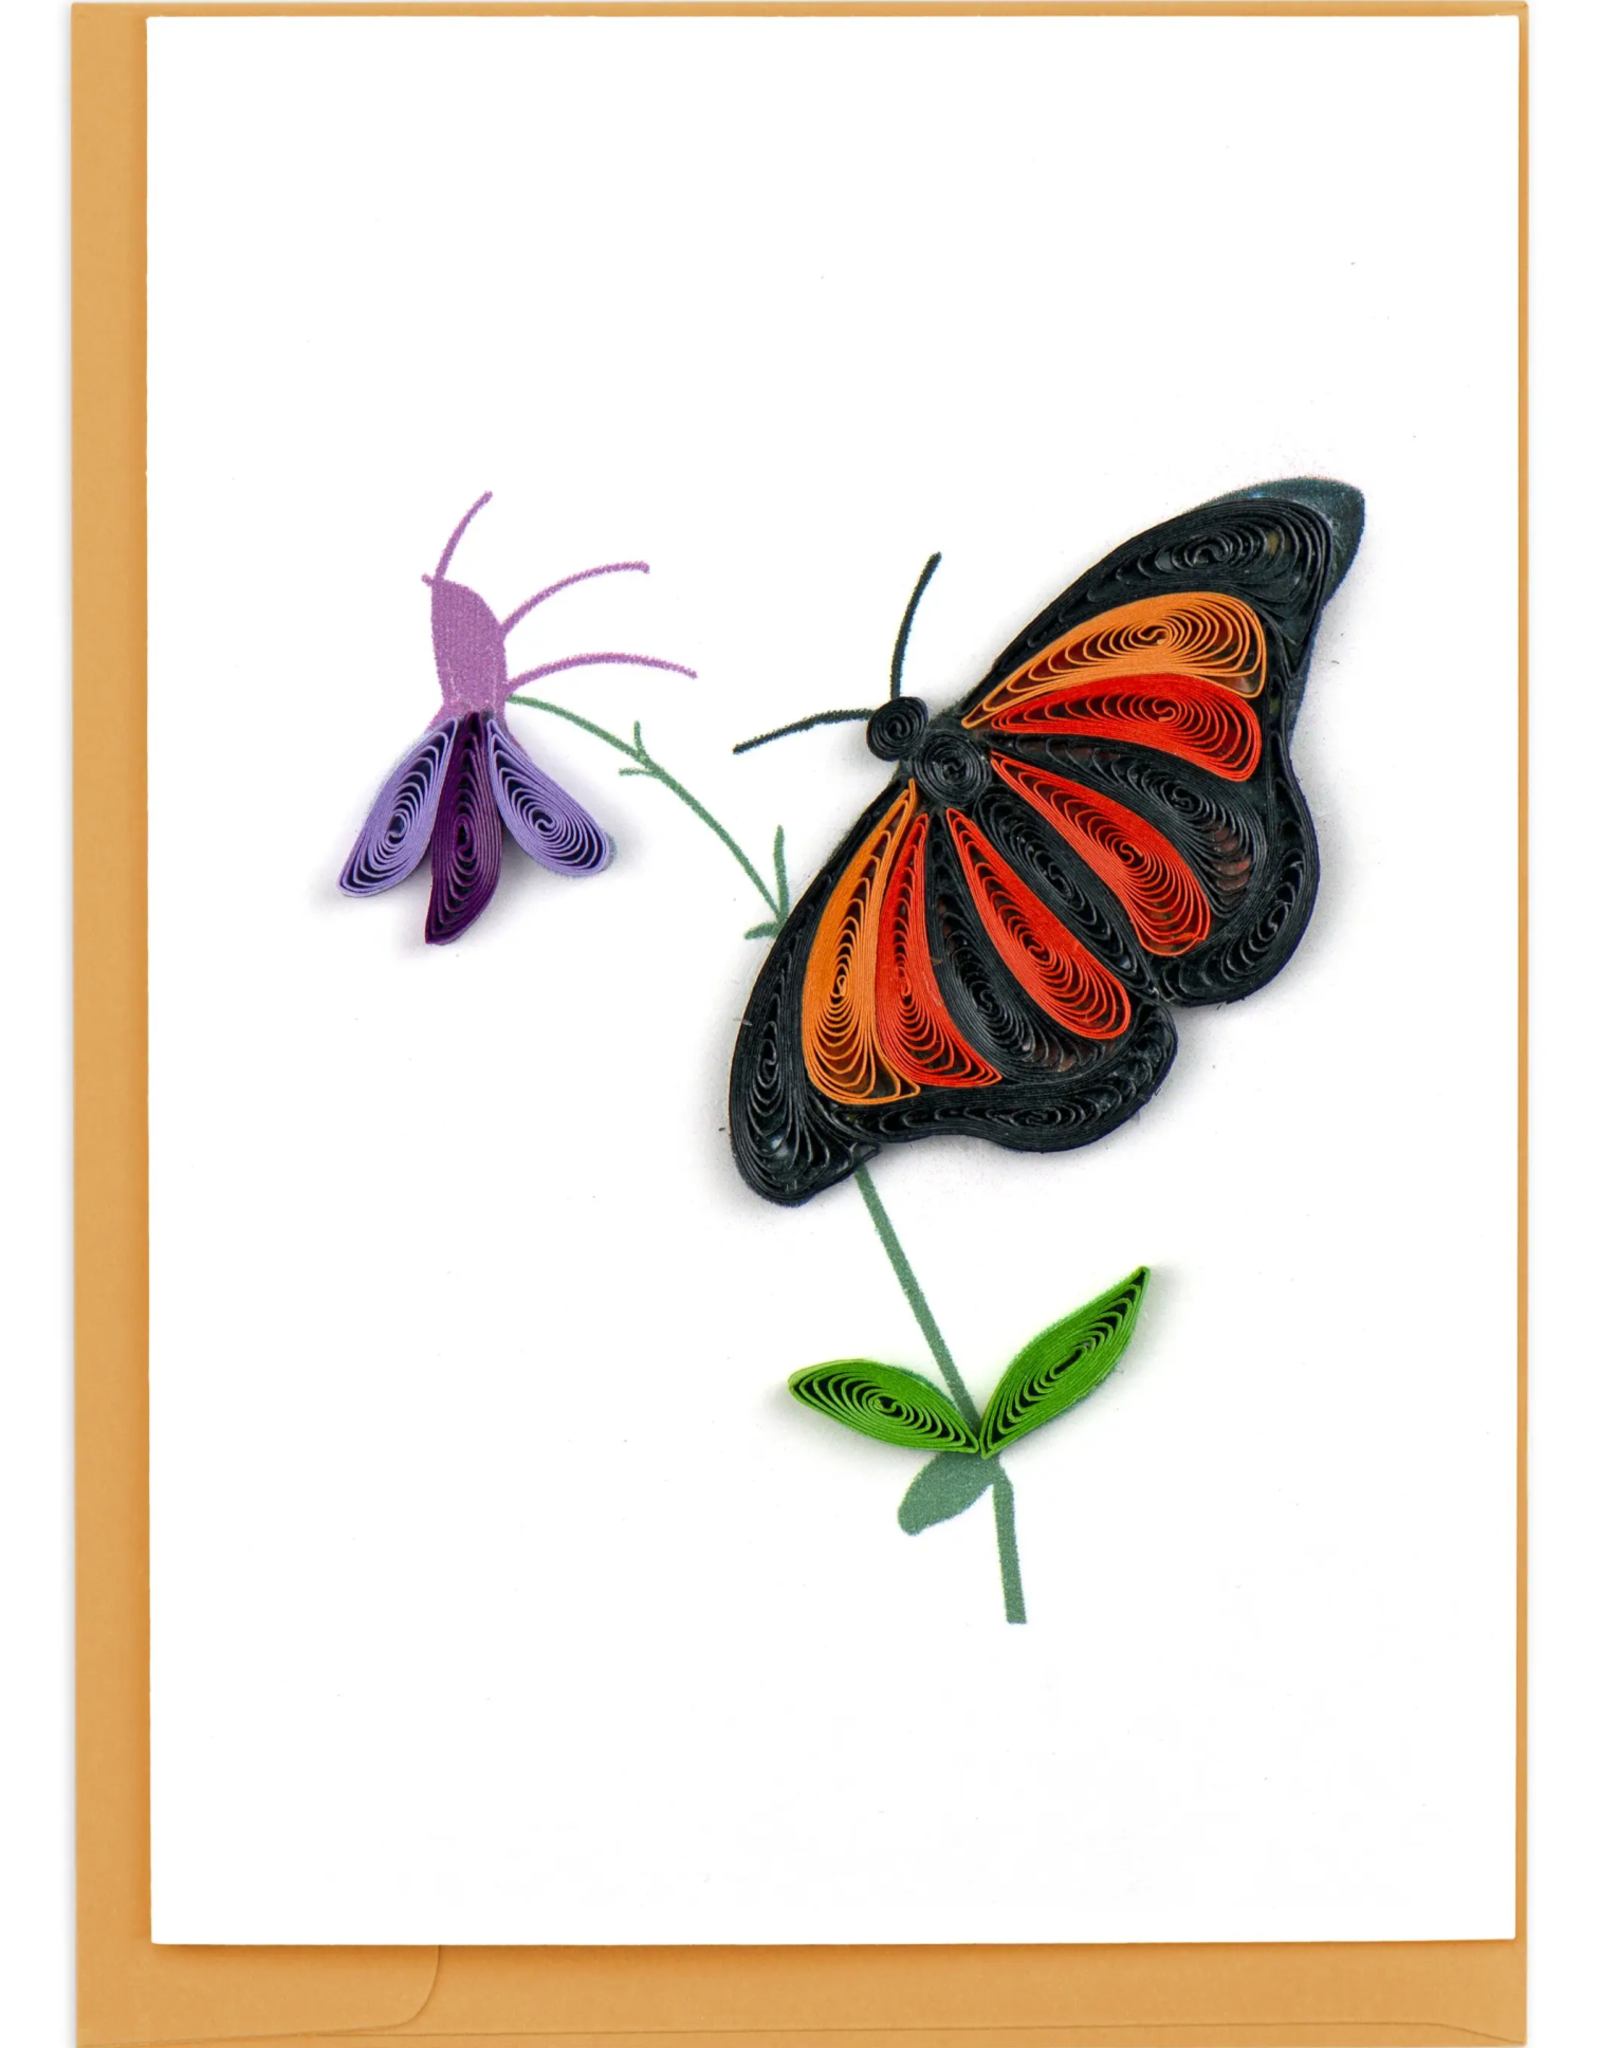 Quilling Card Quilled Monarch Butterfly Gift Enclosure Mini Card